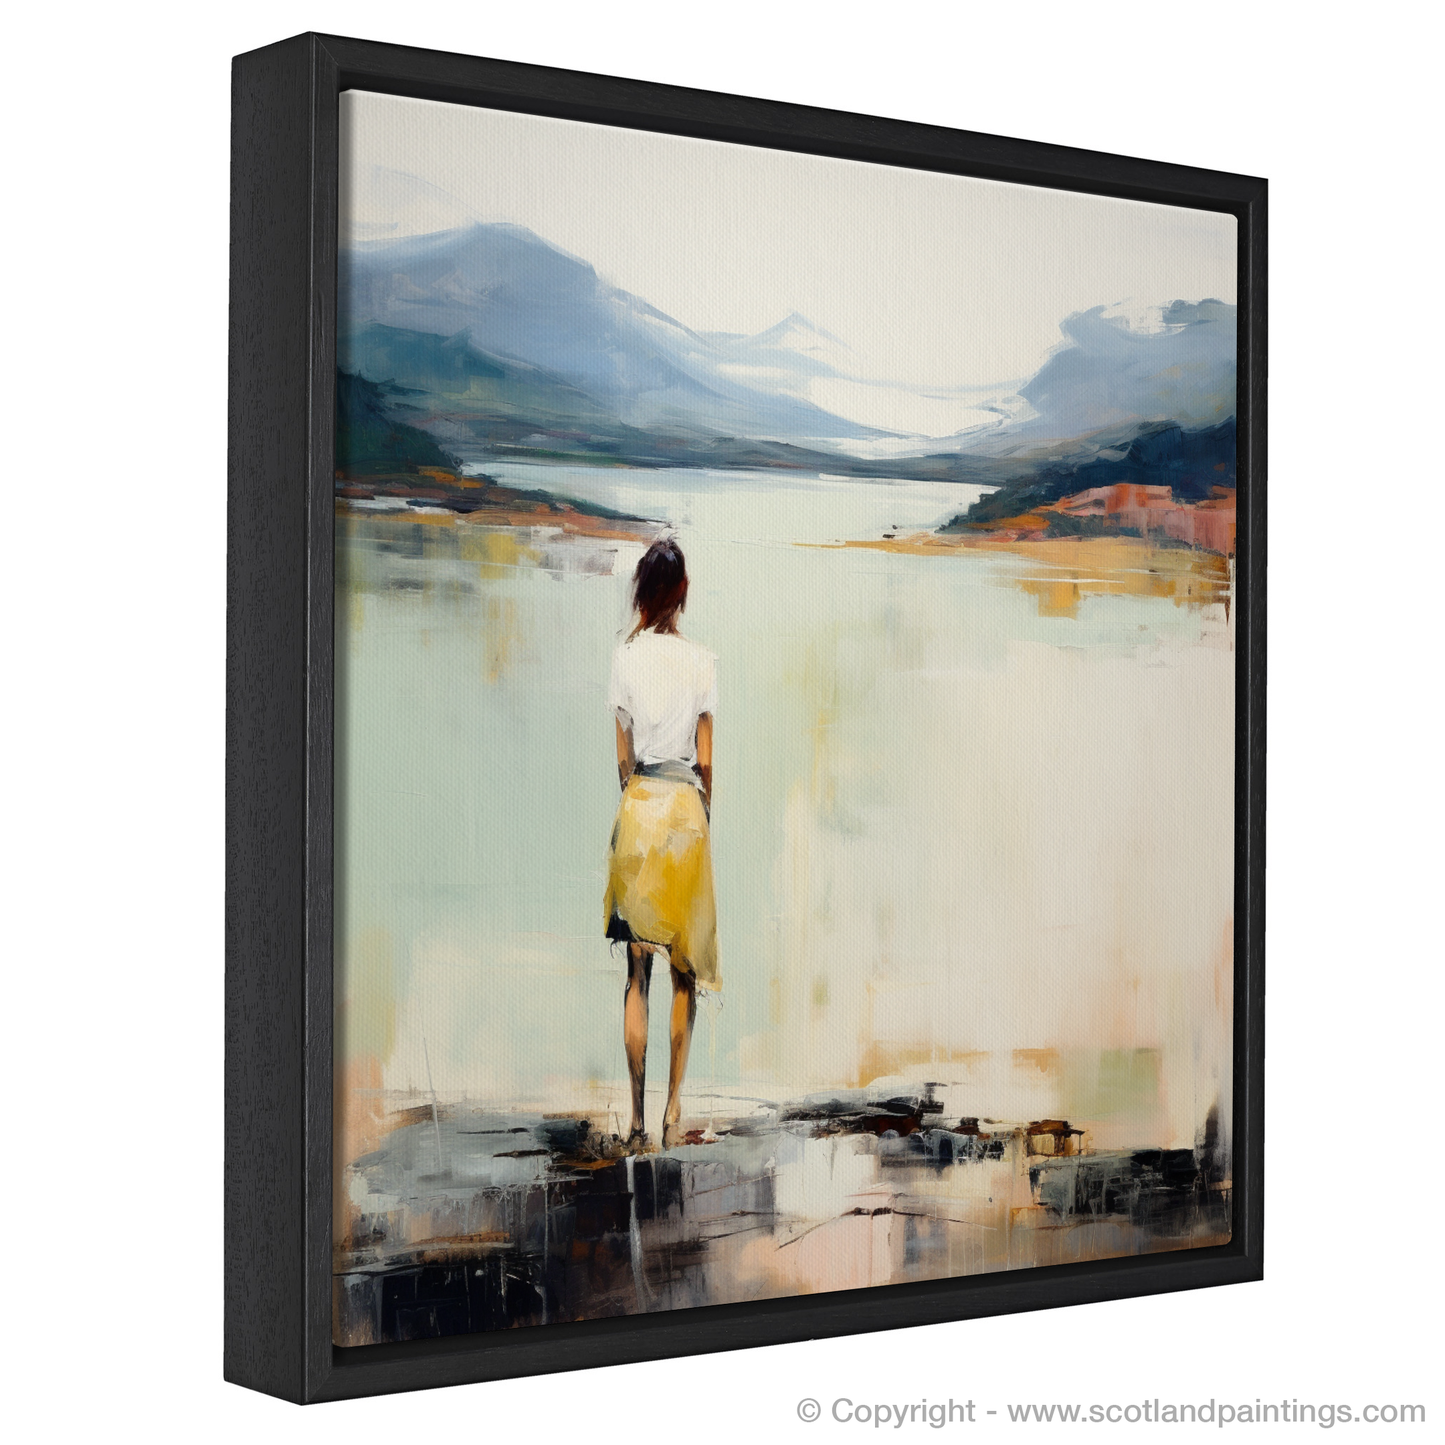 Serene Reflections at Loch Maree: An Abstract Expression of Contemplation and Elegance